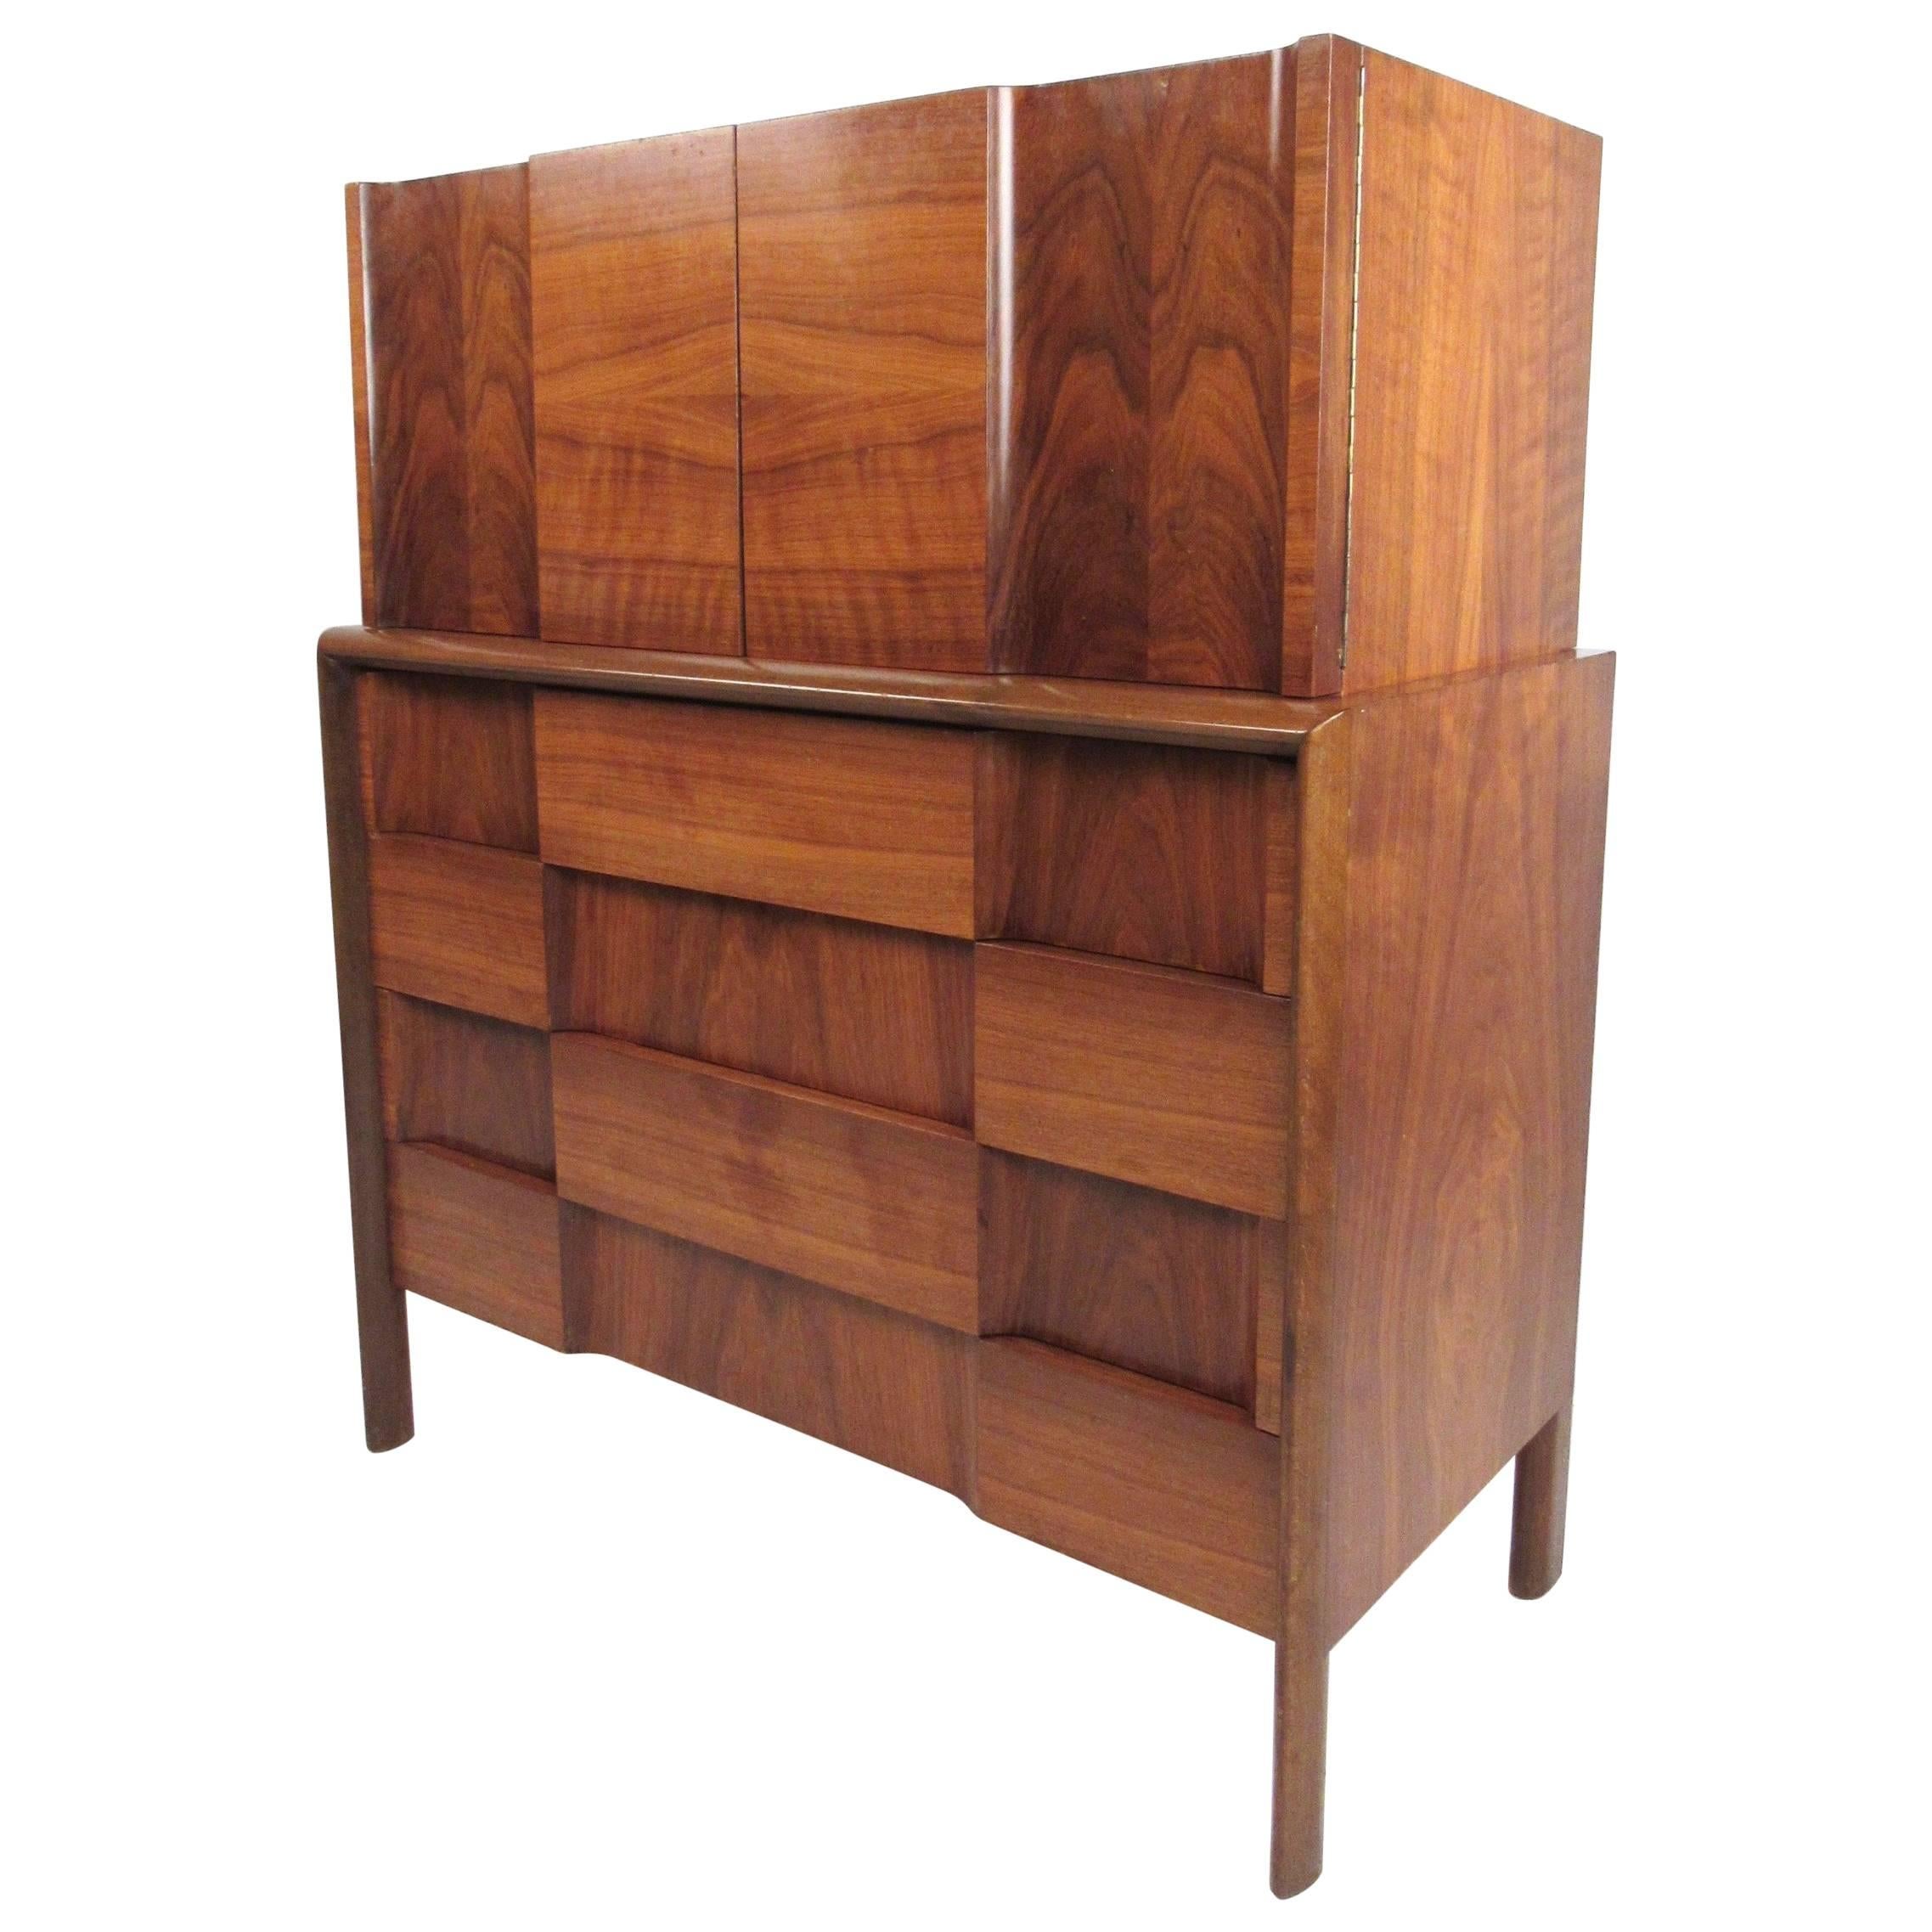 This Edmond Spence designed midcentury dresser features stunning marquetry combined with carefully sculpted 